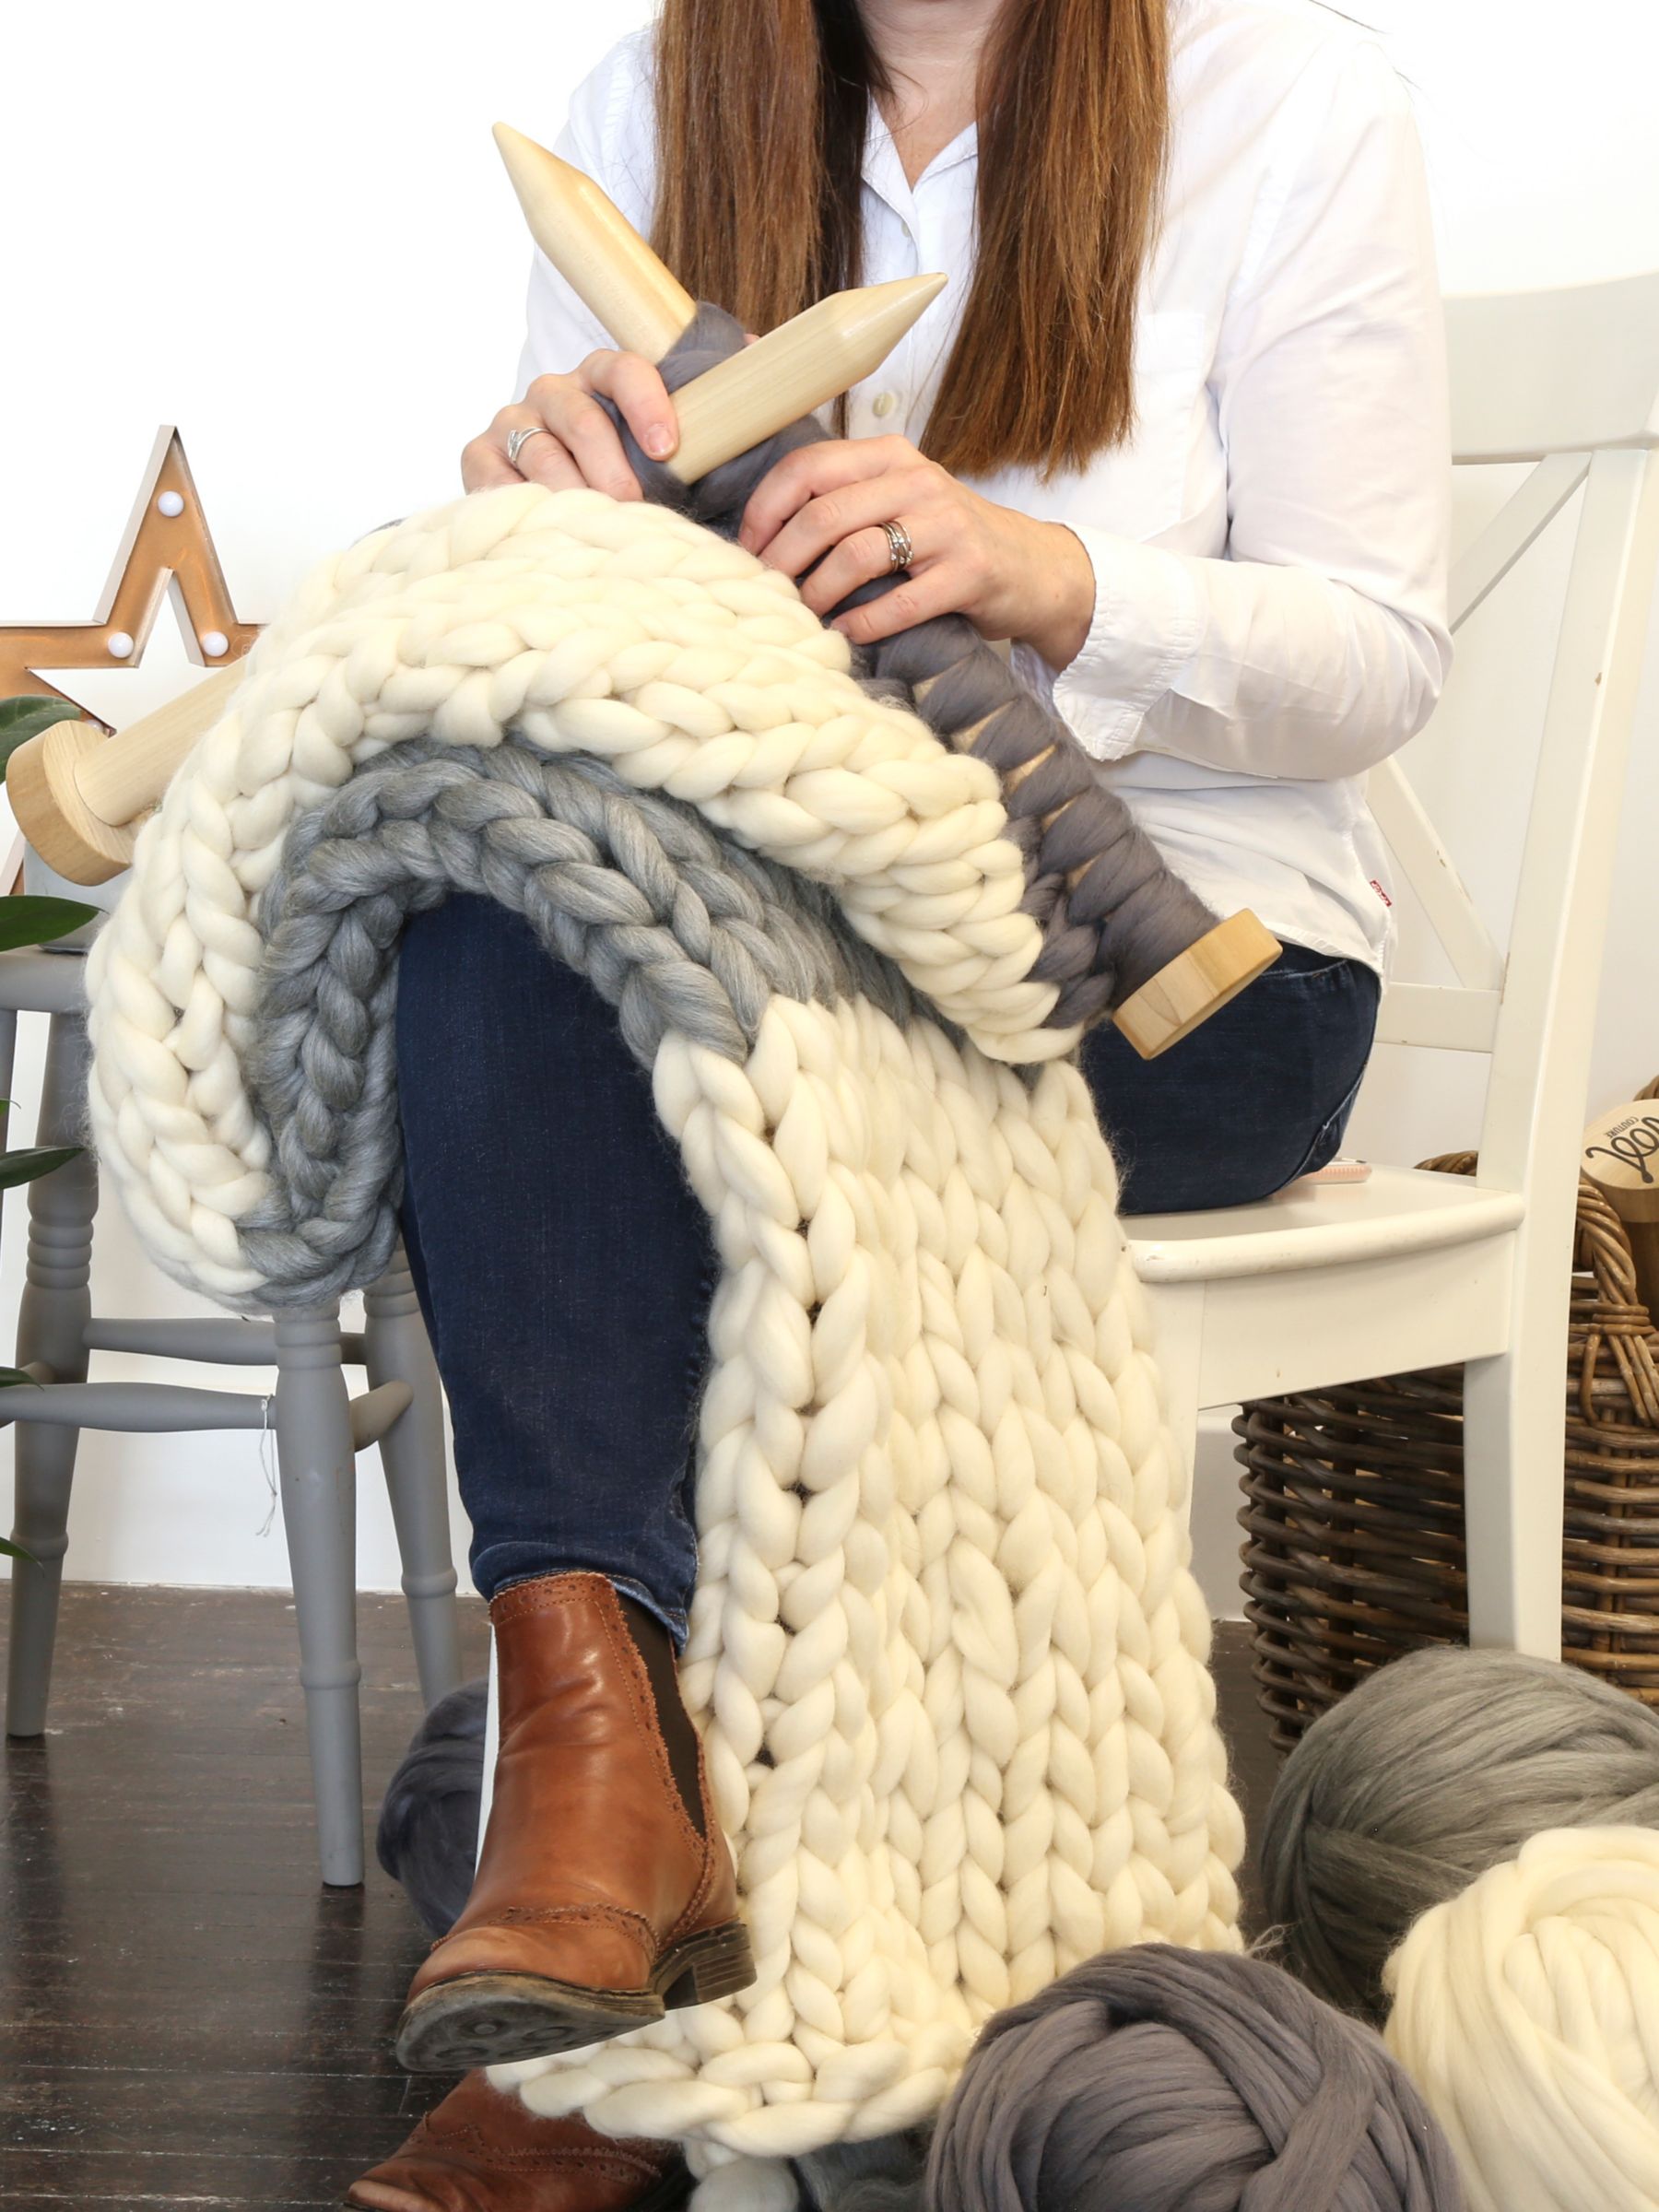 Wool Couture Giant Knitted Blanket Craft Kit At John Lewis Partners